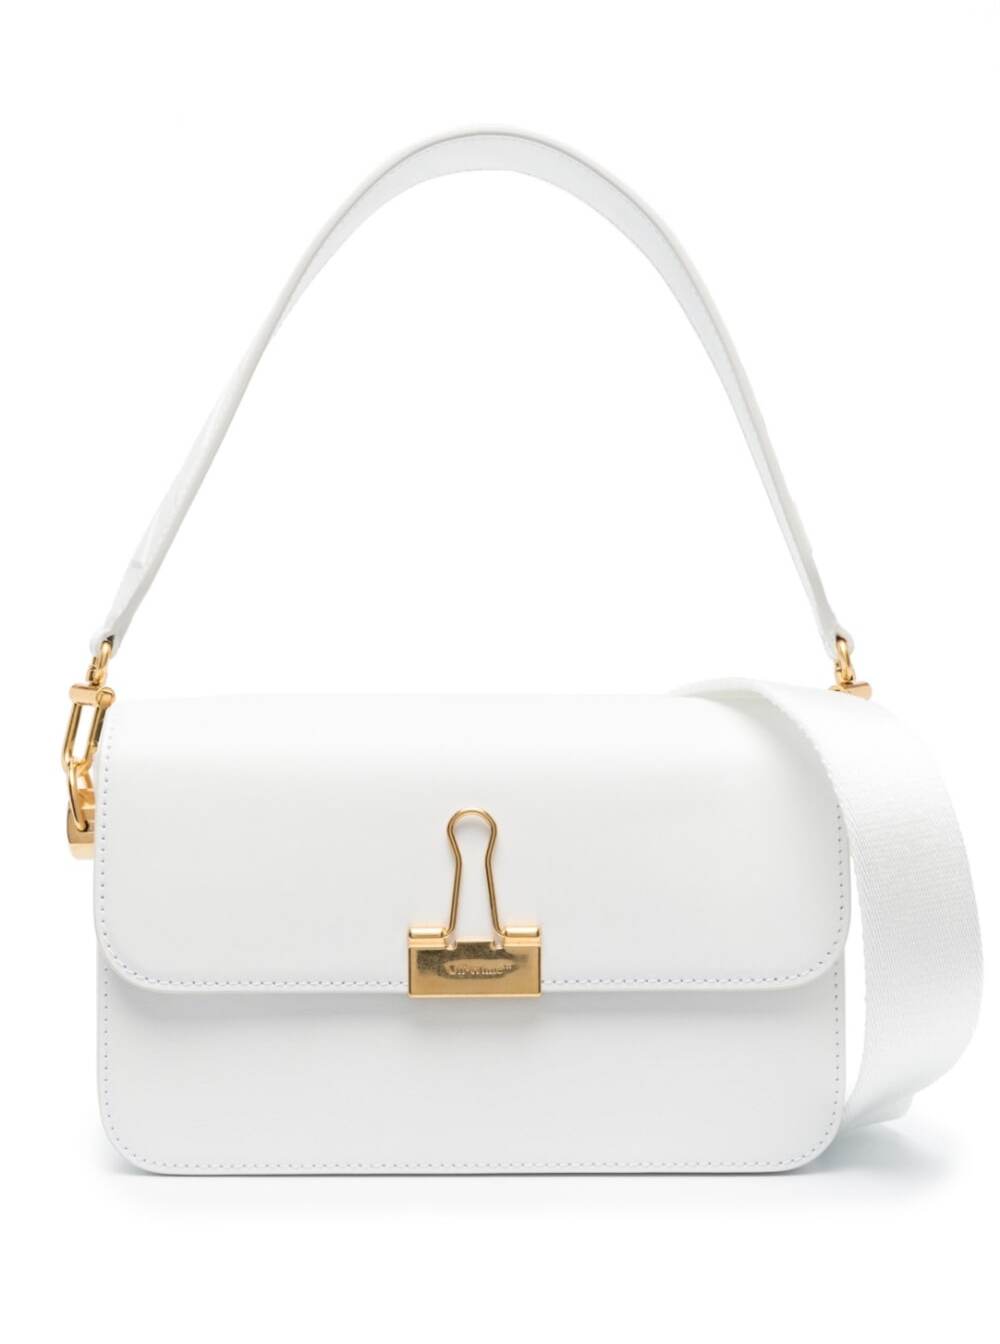 OFF-WHITE BINDER CLIP CROSSBODY BAG IN WHITE LEATHER WOMAN